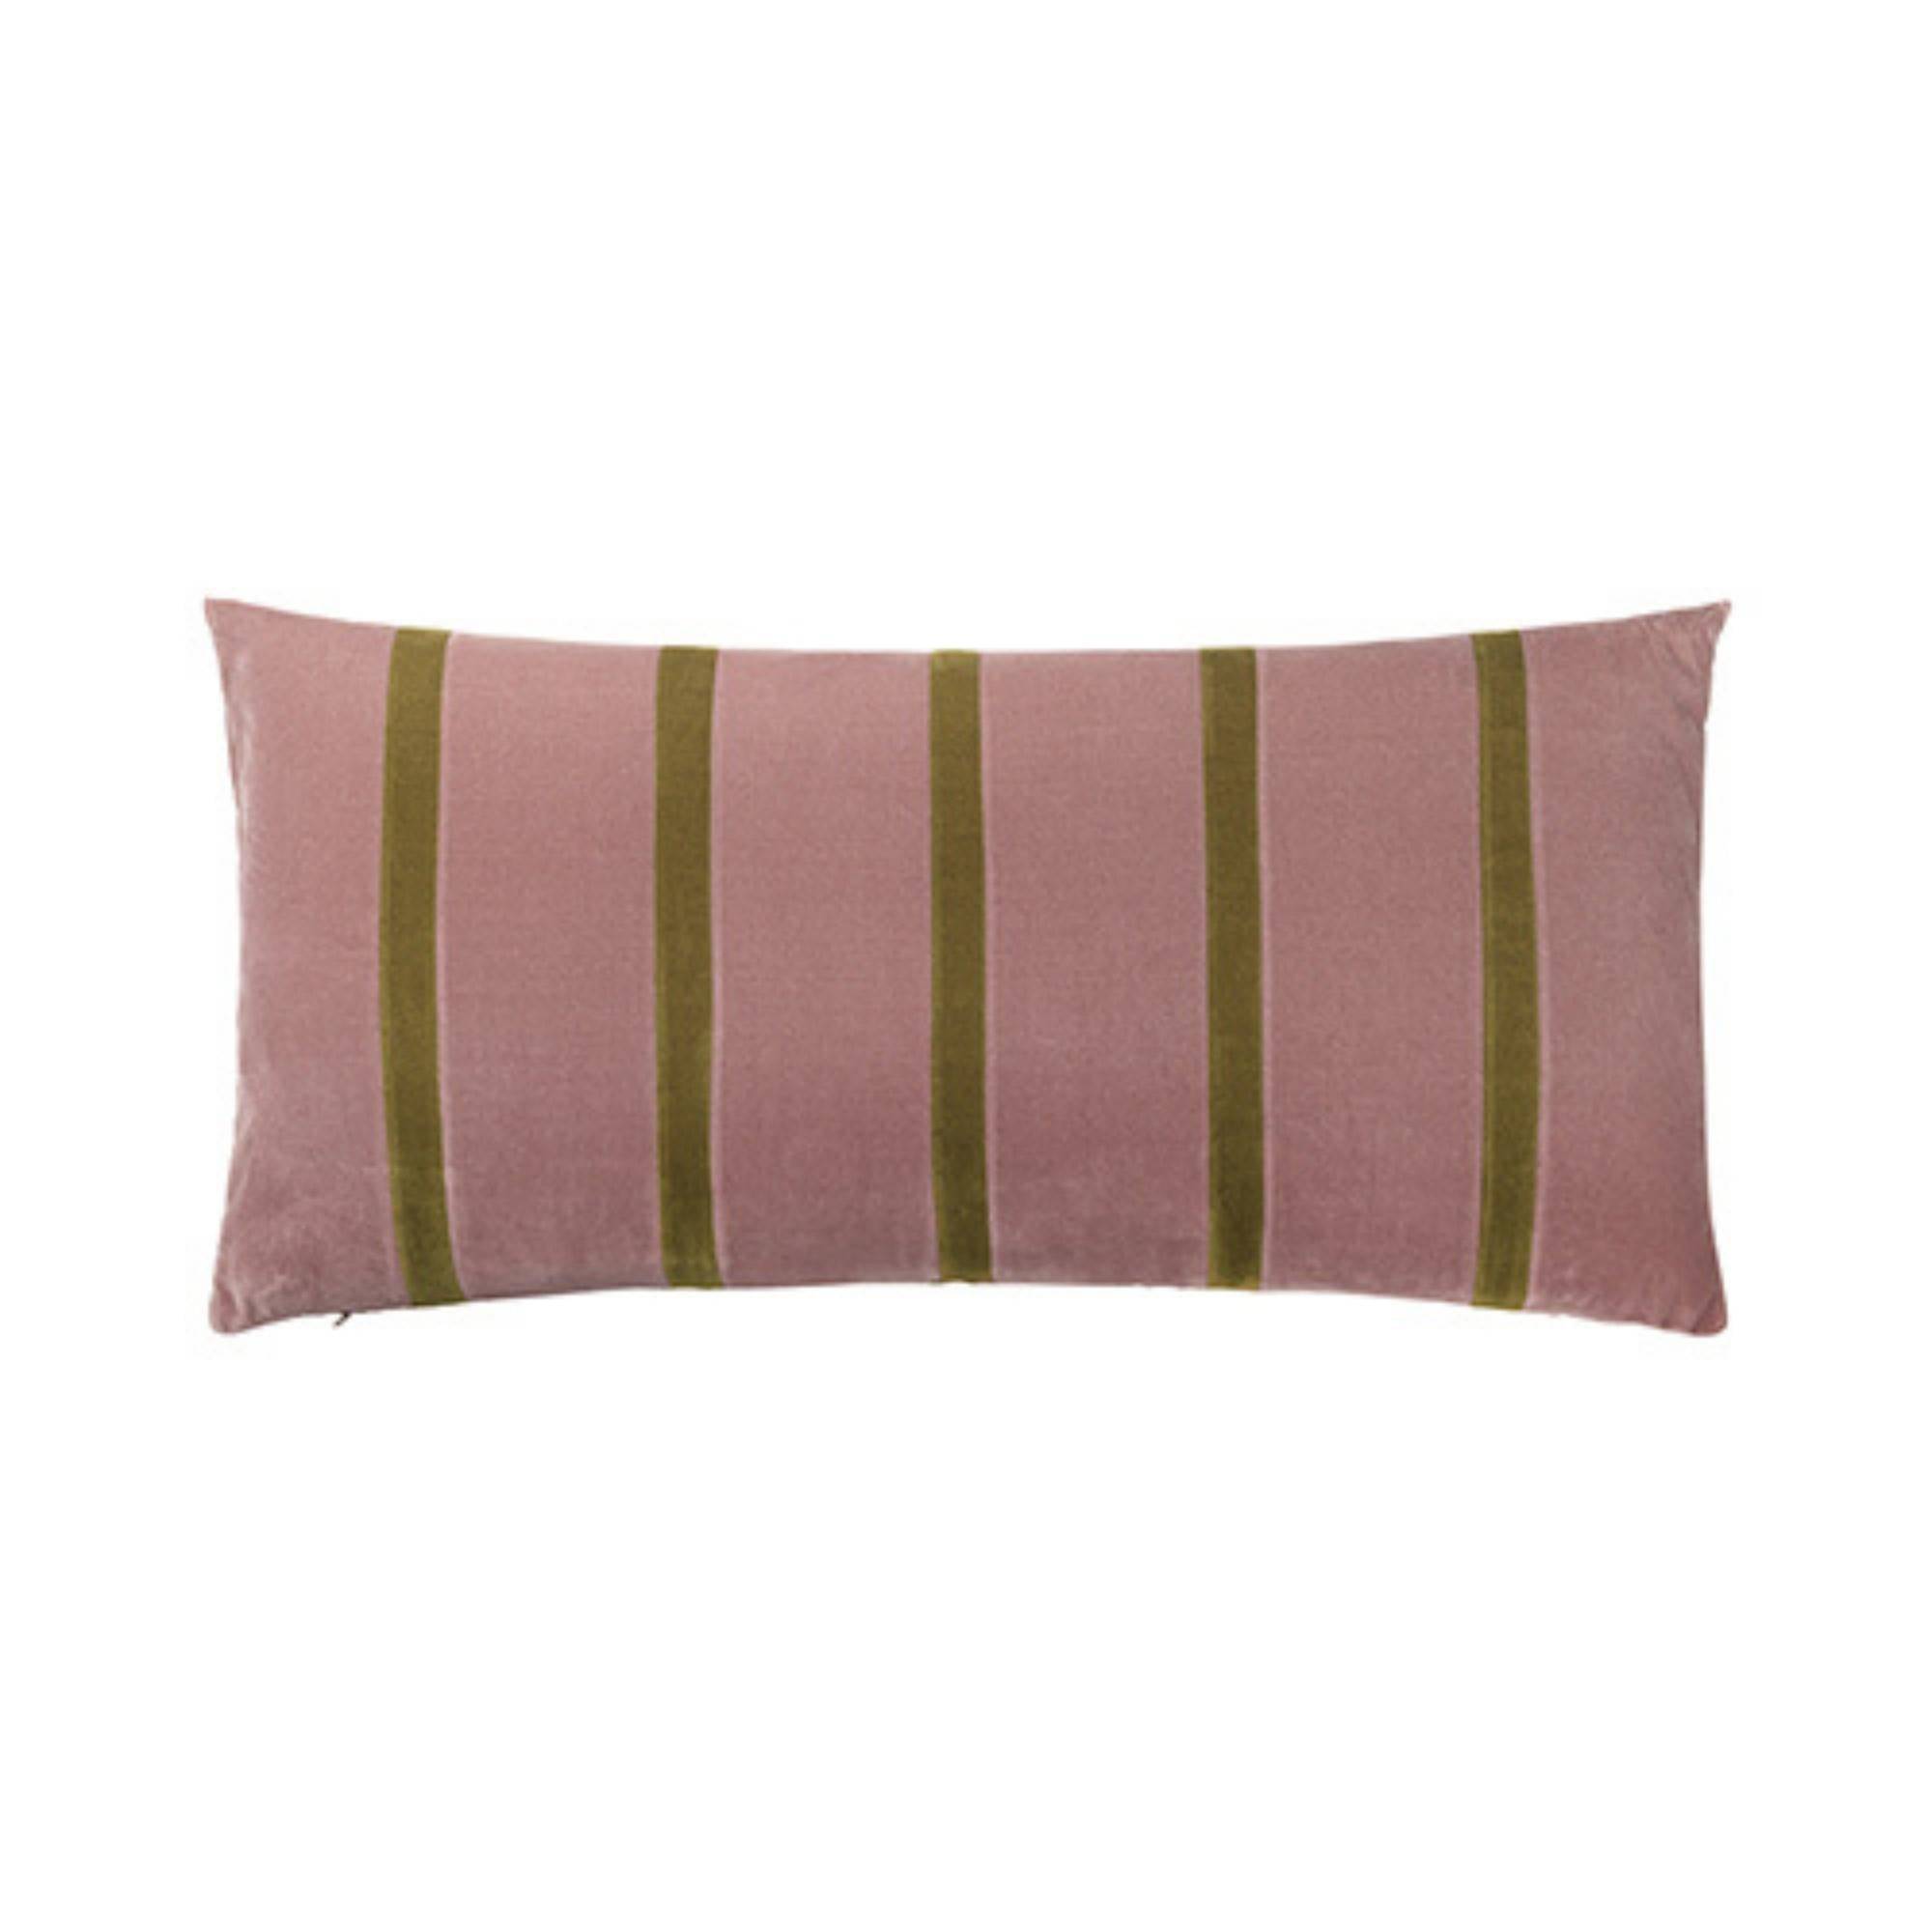 Pippa Cushion - Old Rose & Willow